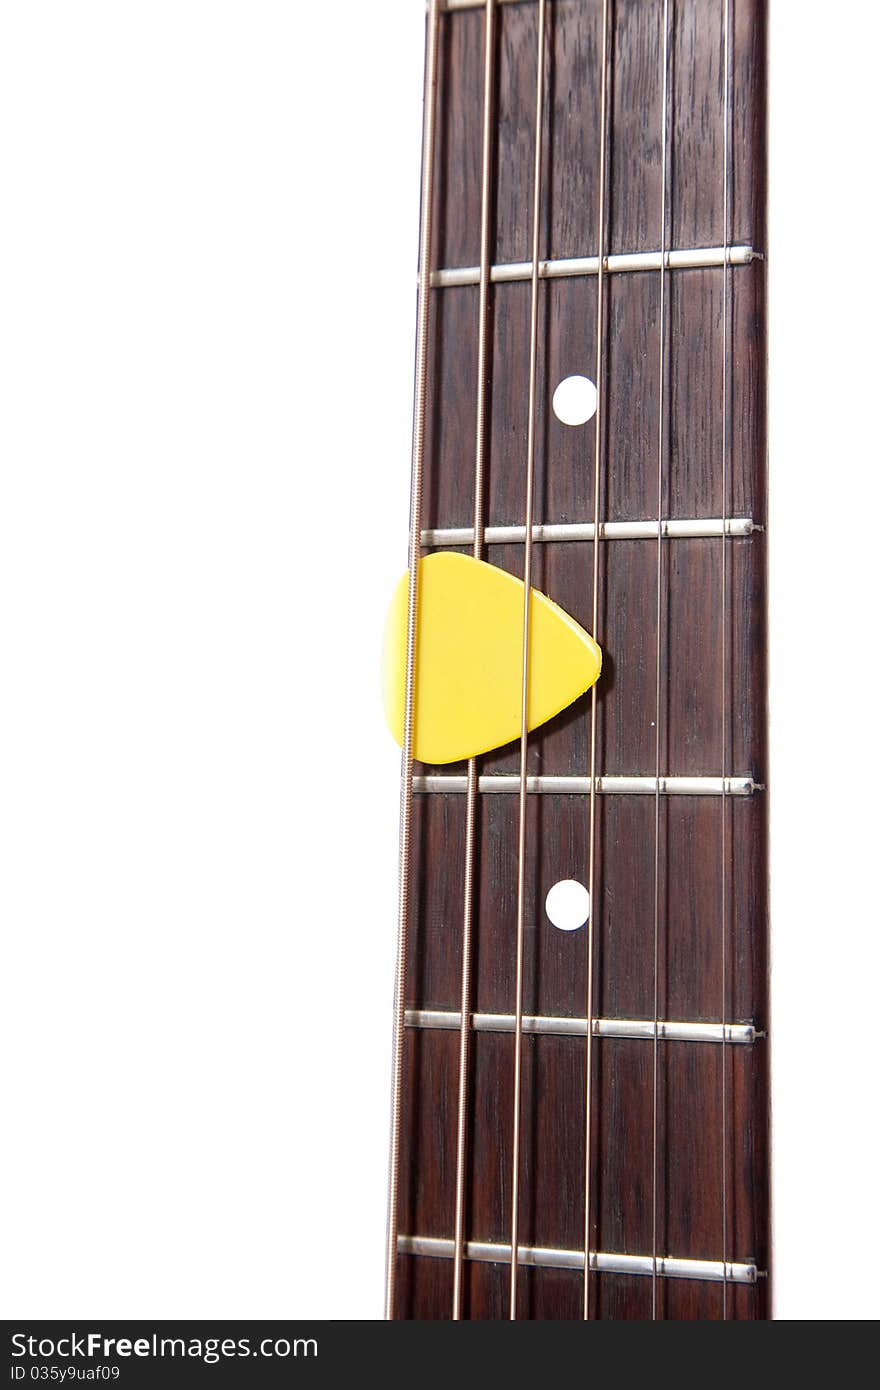 Guitarneck and pick from infront